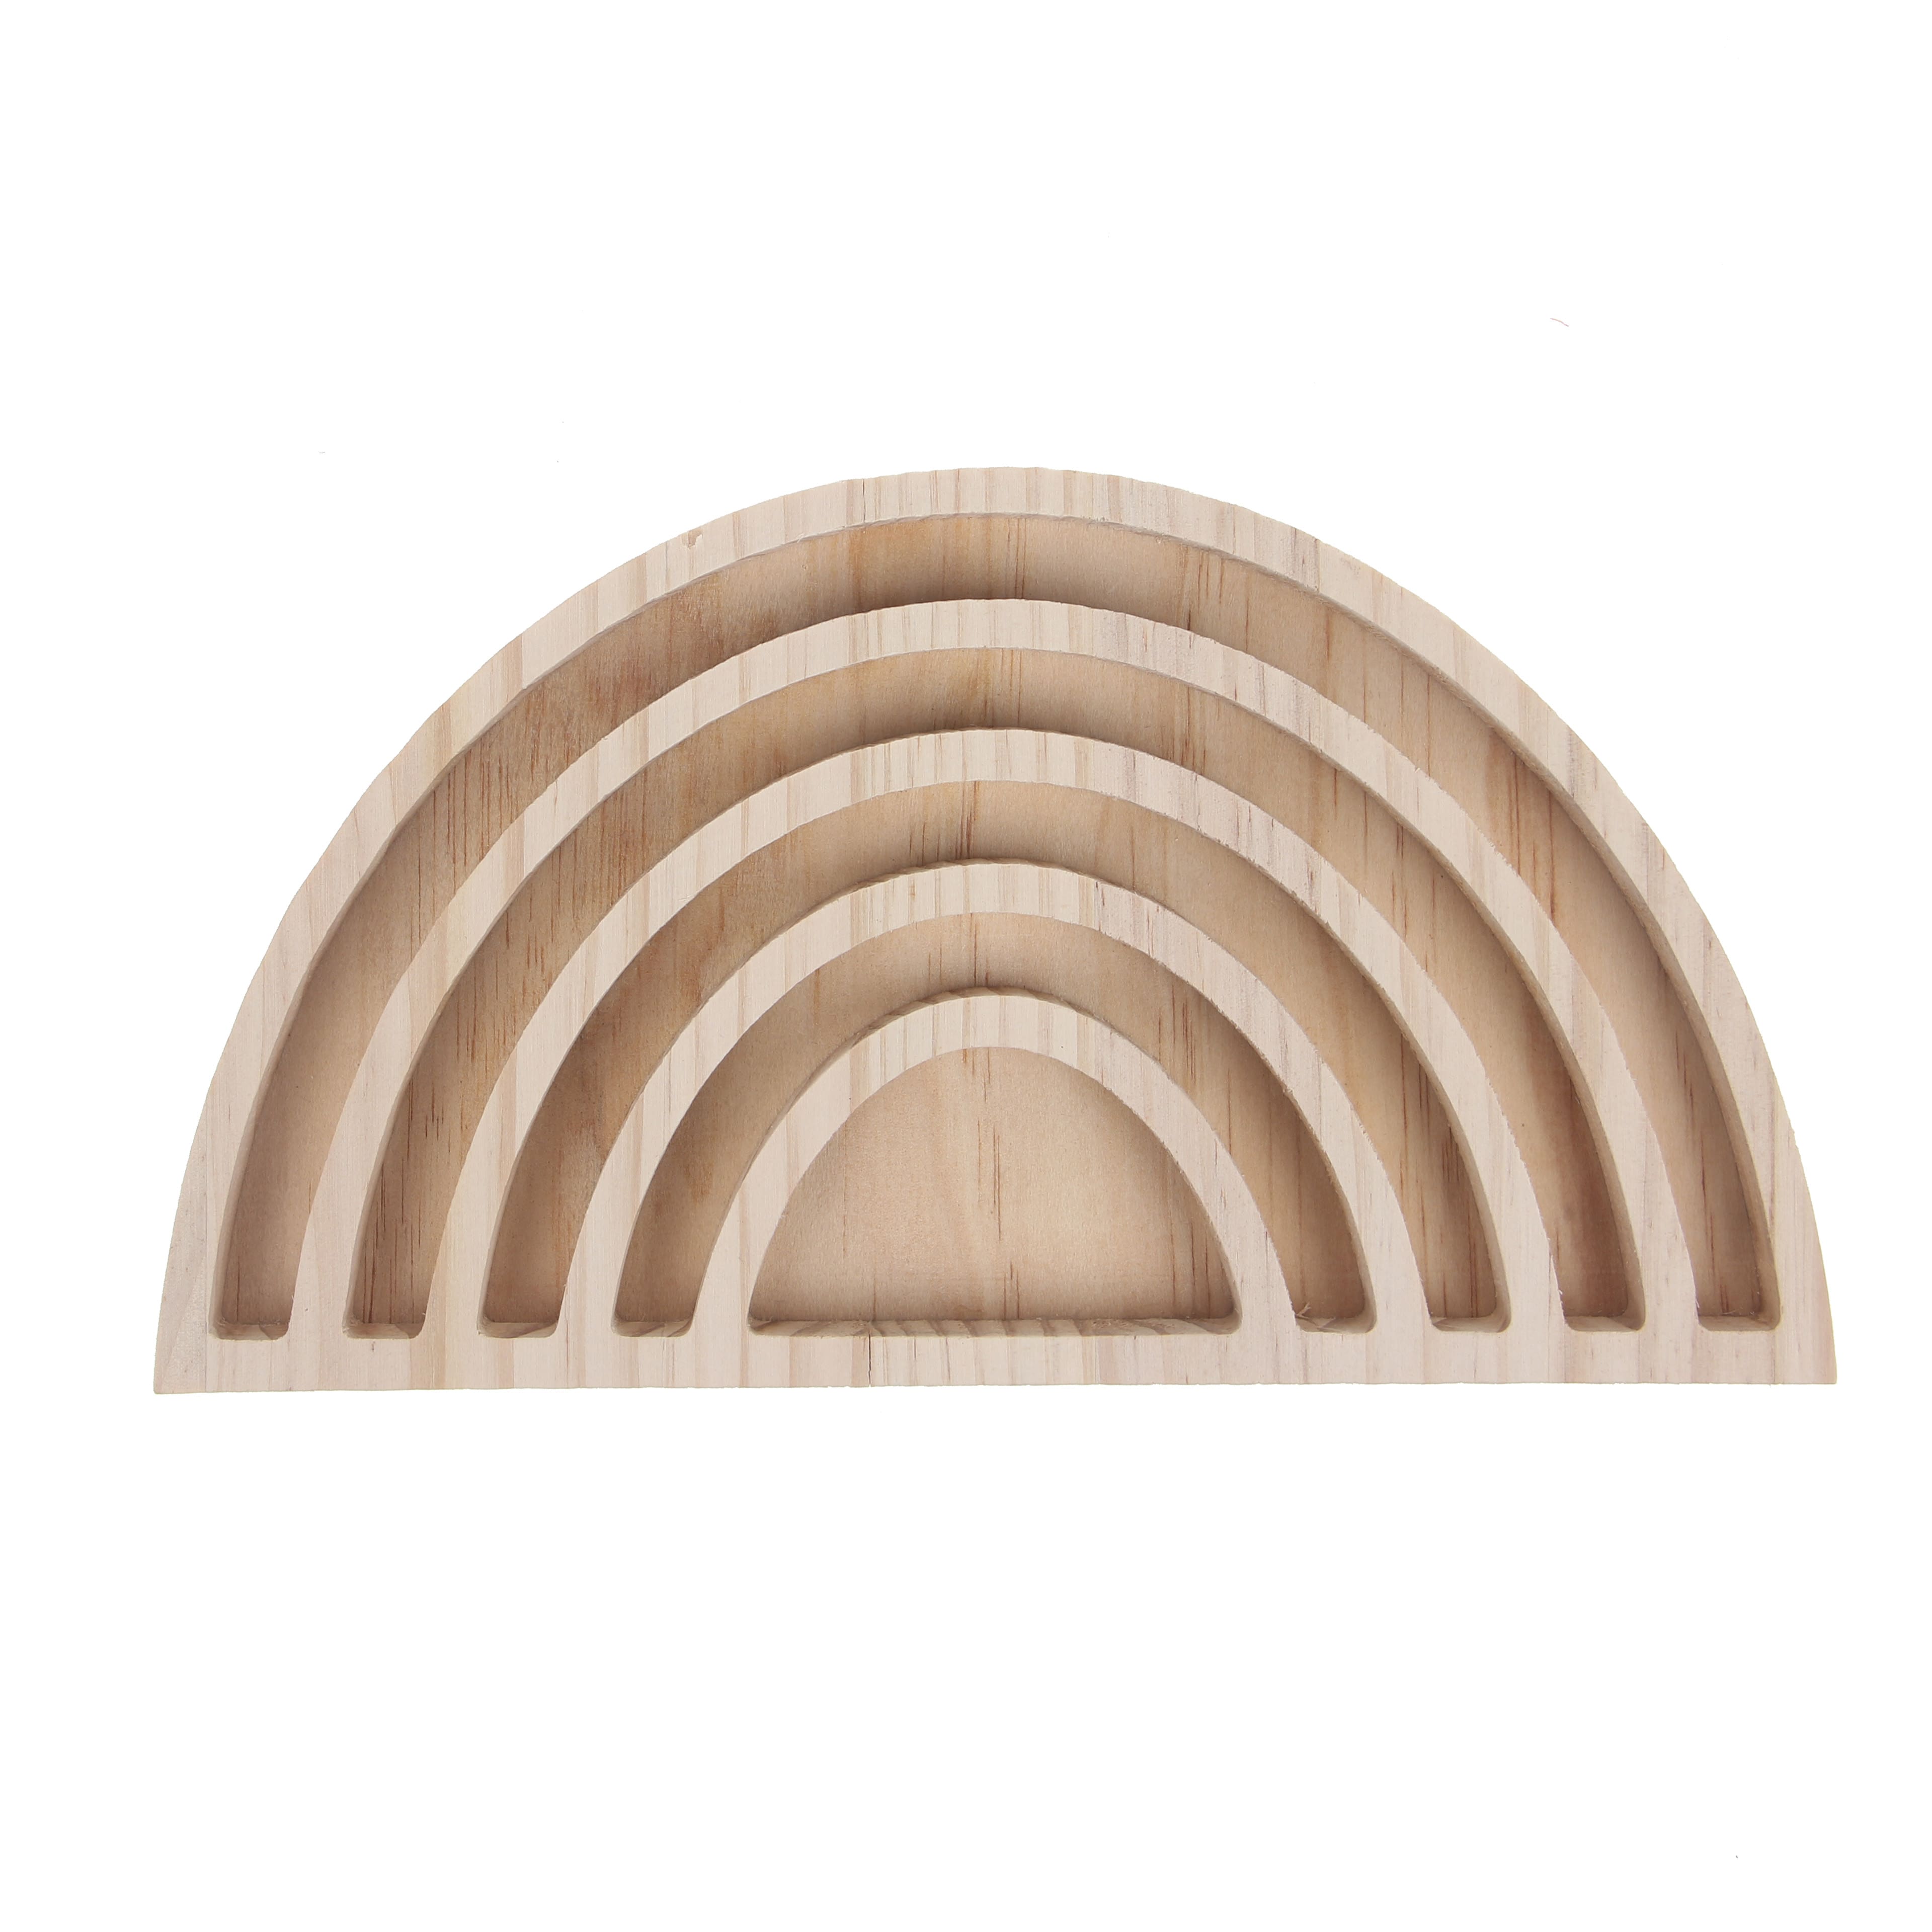 Unfinished Wood Nesting Serving Trays with Handles, Set of 3, for Crafting, Resin, Organizing, DIY Dcor, and Montessori Activity, by Woodpeckers, Size